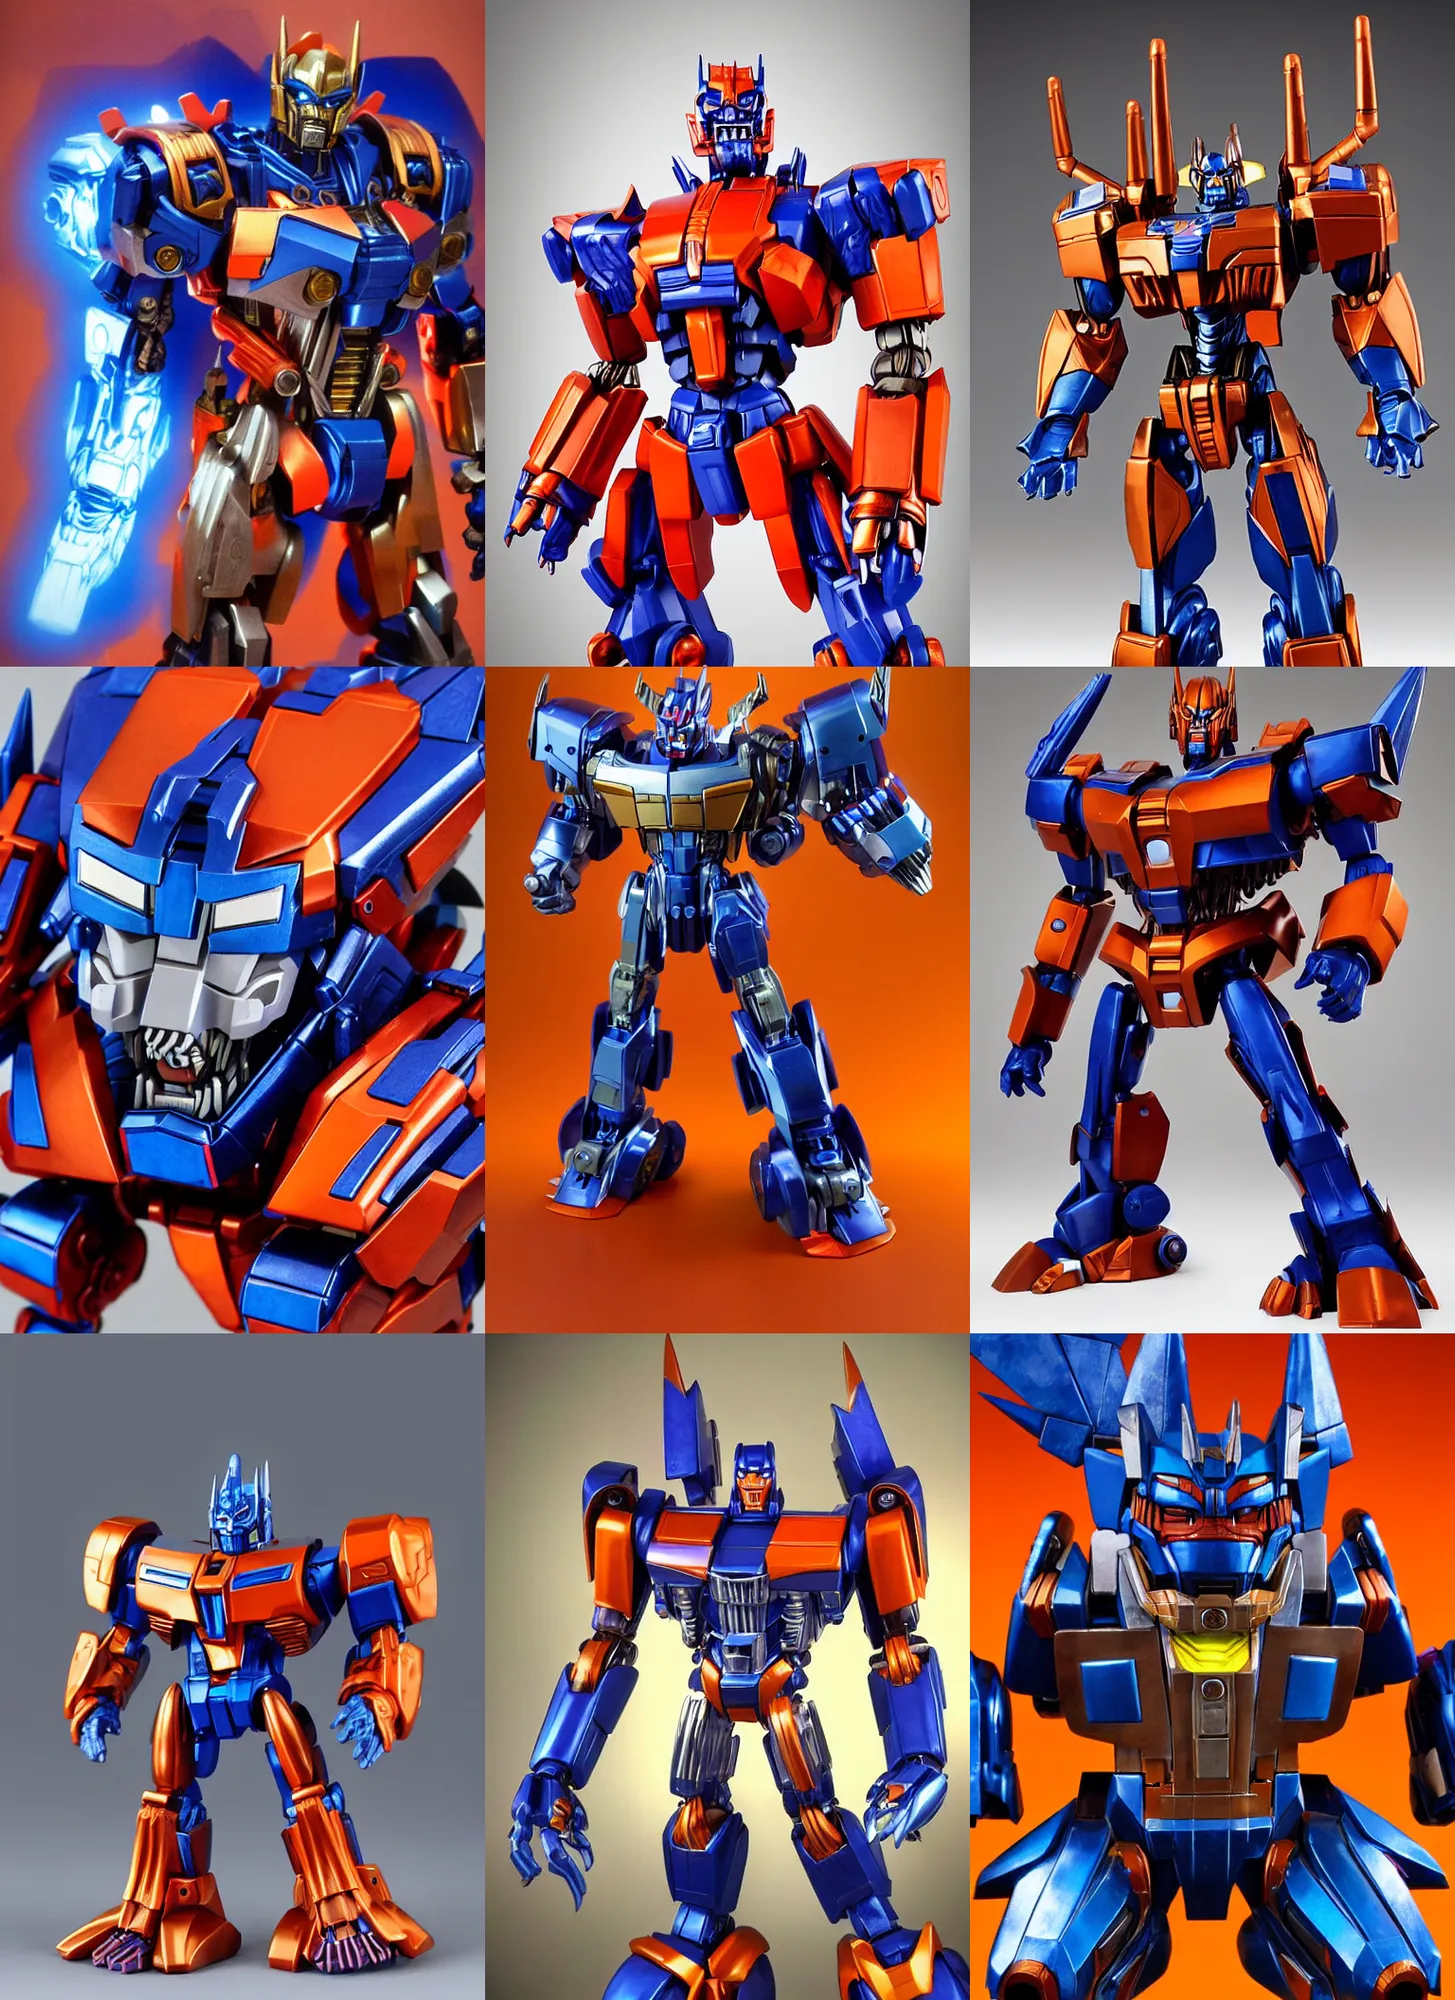 Prompt: dynamic character portrait of optimal optimus from beast wars in robot mode, beast wars, beast wars, transmetal, transmetal ii, transmetal toy, transmetal toys, beast wars toy, beast wars toys, transformers toy, transformers toys, chromed orange and blue color scheme, metallic chrome paint, transformers, transformers beast wars